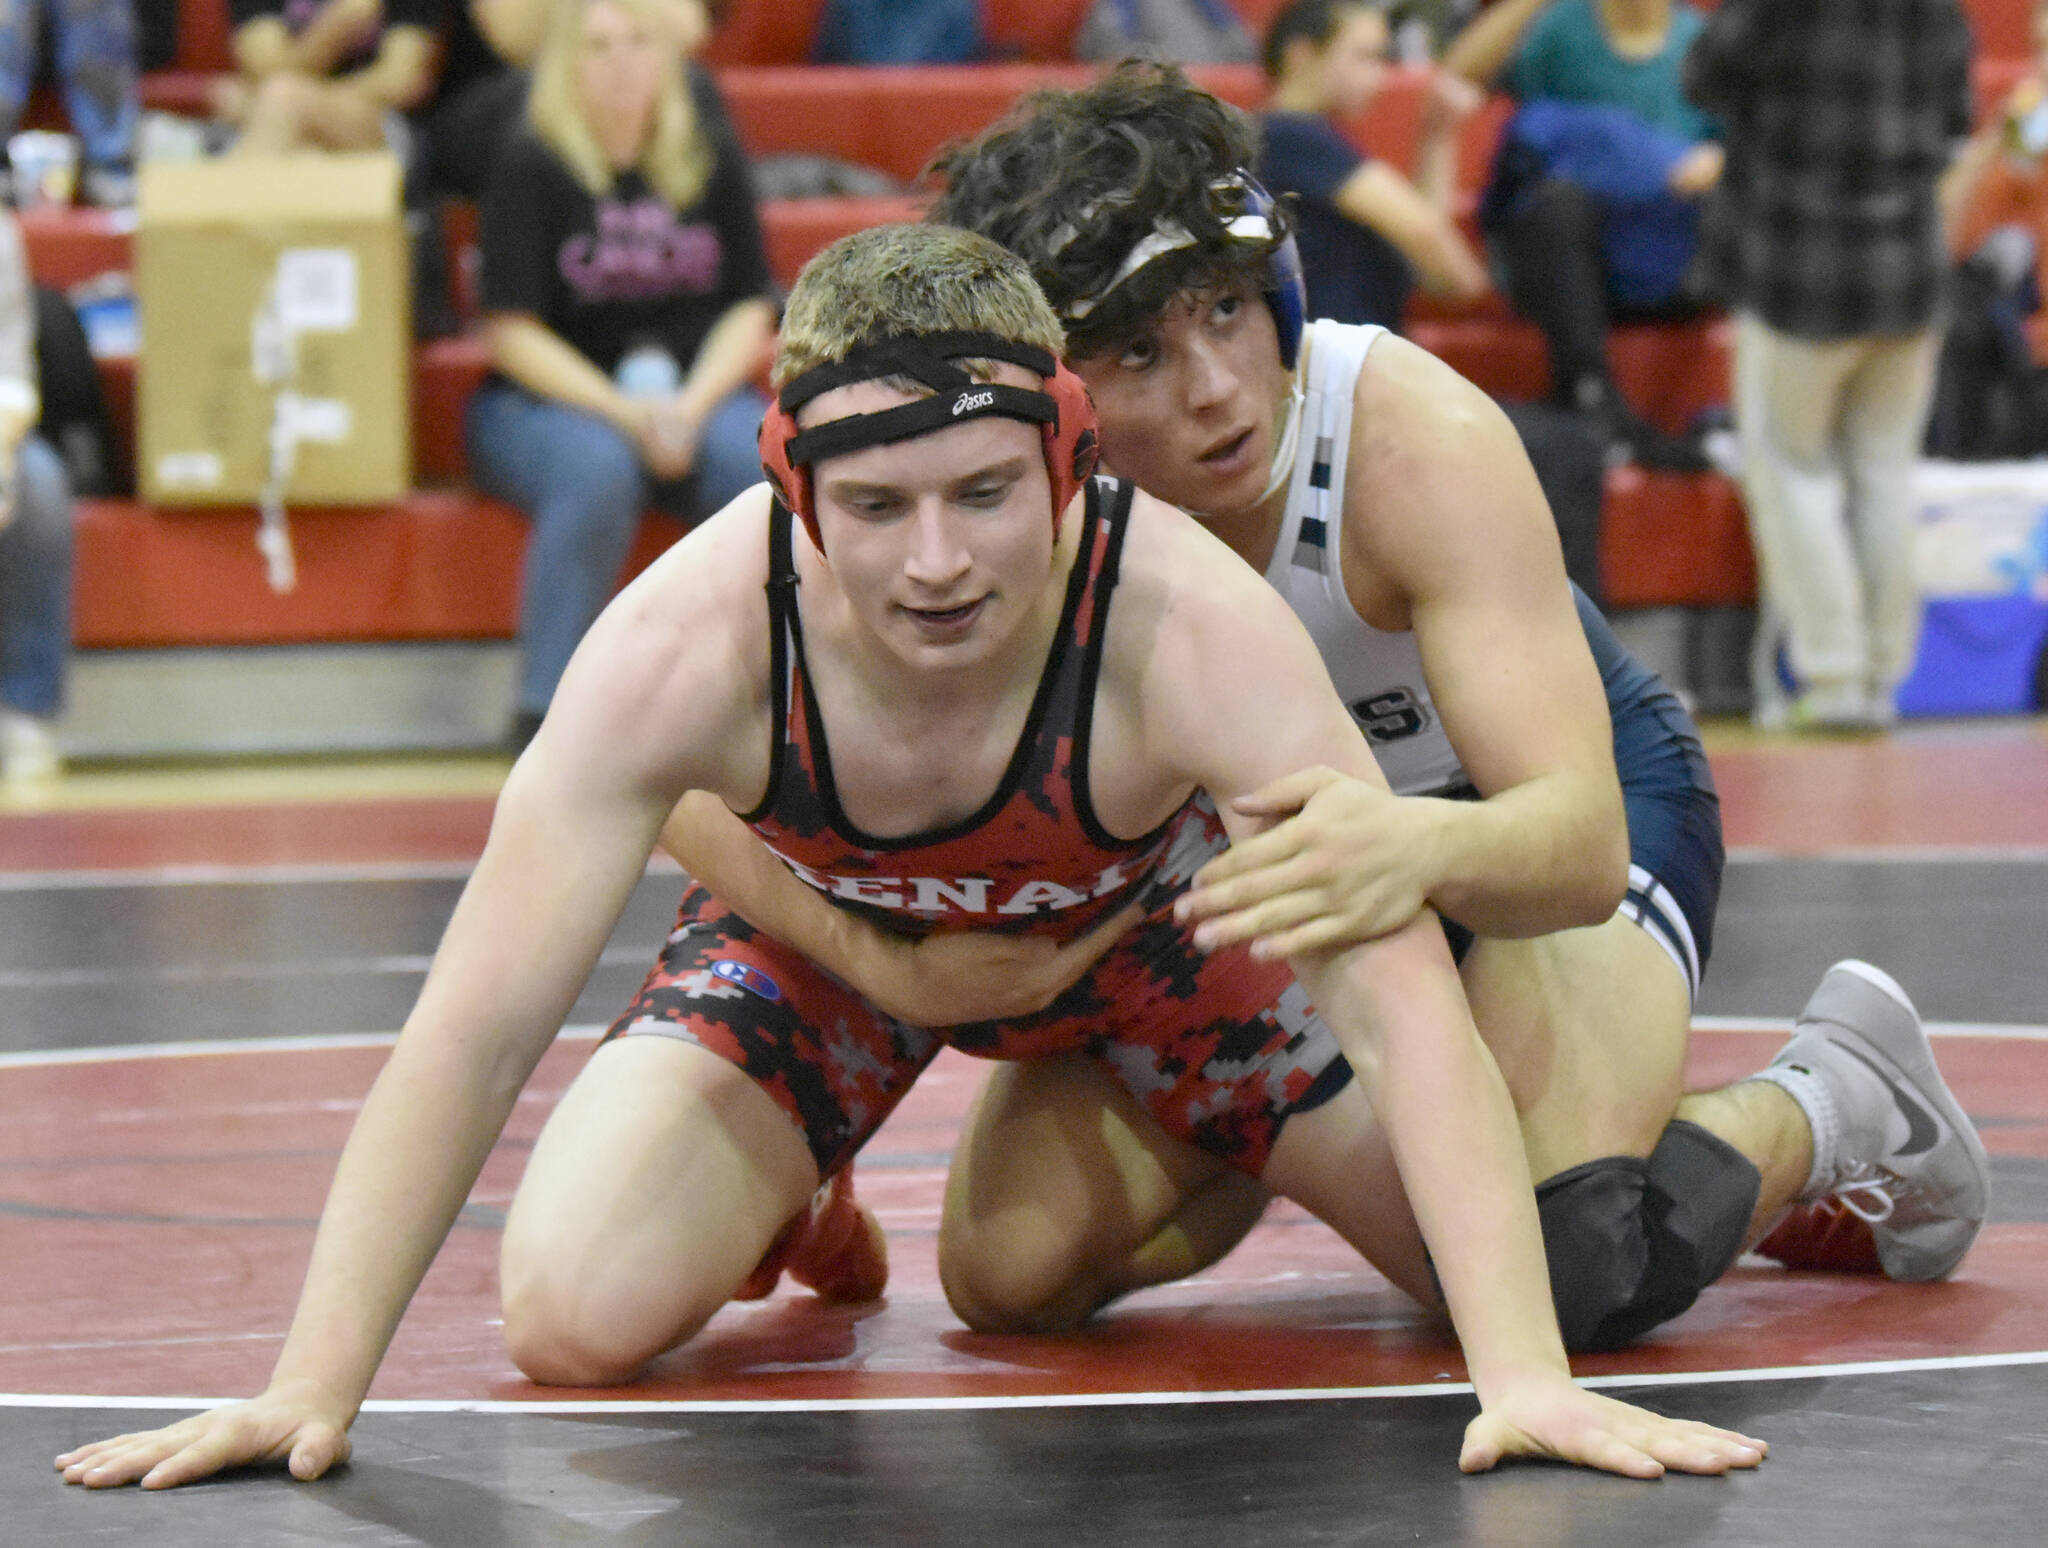 Kenai Central’s Andrew Gaethle and Soldotna’s Isaac Chavarria wrestle at 152 pounds at the Luke Spruill Memorial Tournament on Saturday, Oct. 22, 2022, at Kenai Central High School in Kenai, Alaska. Chavarria won by technical fall. (Photo by Jeff Helminiak/Peninsula Clarion)